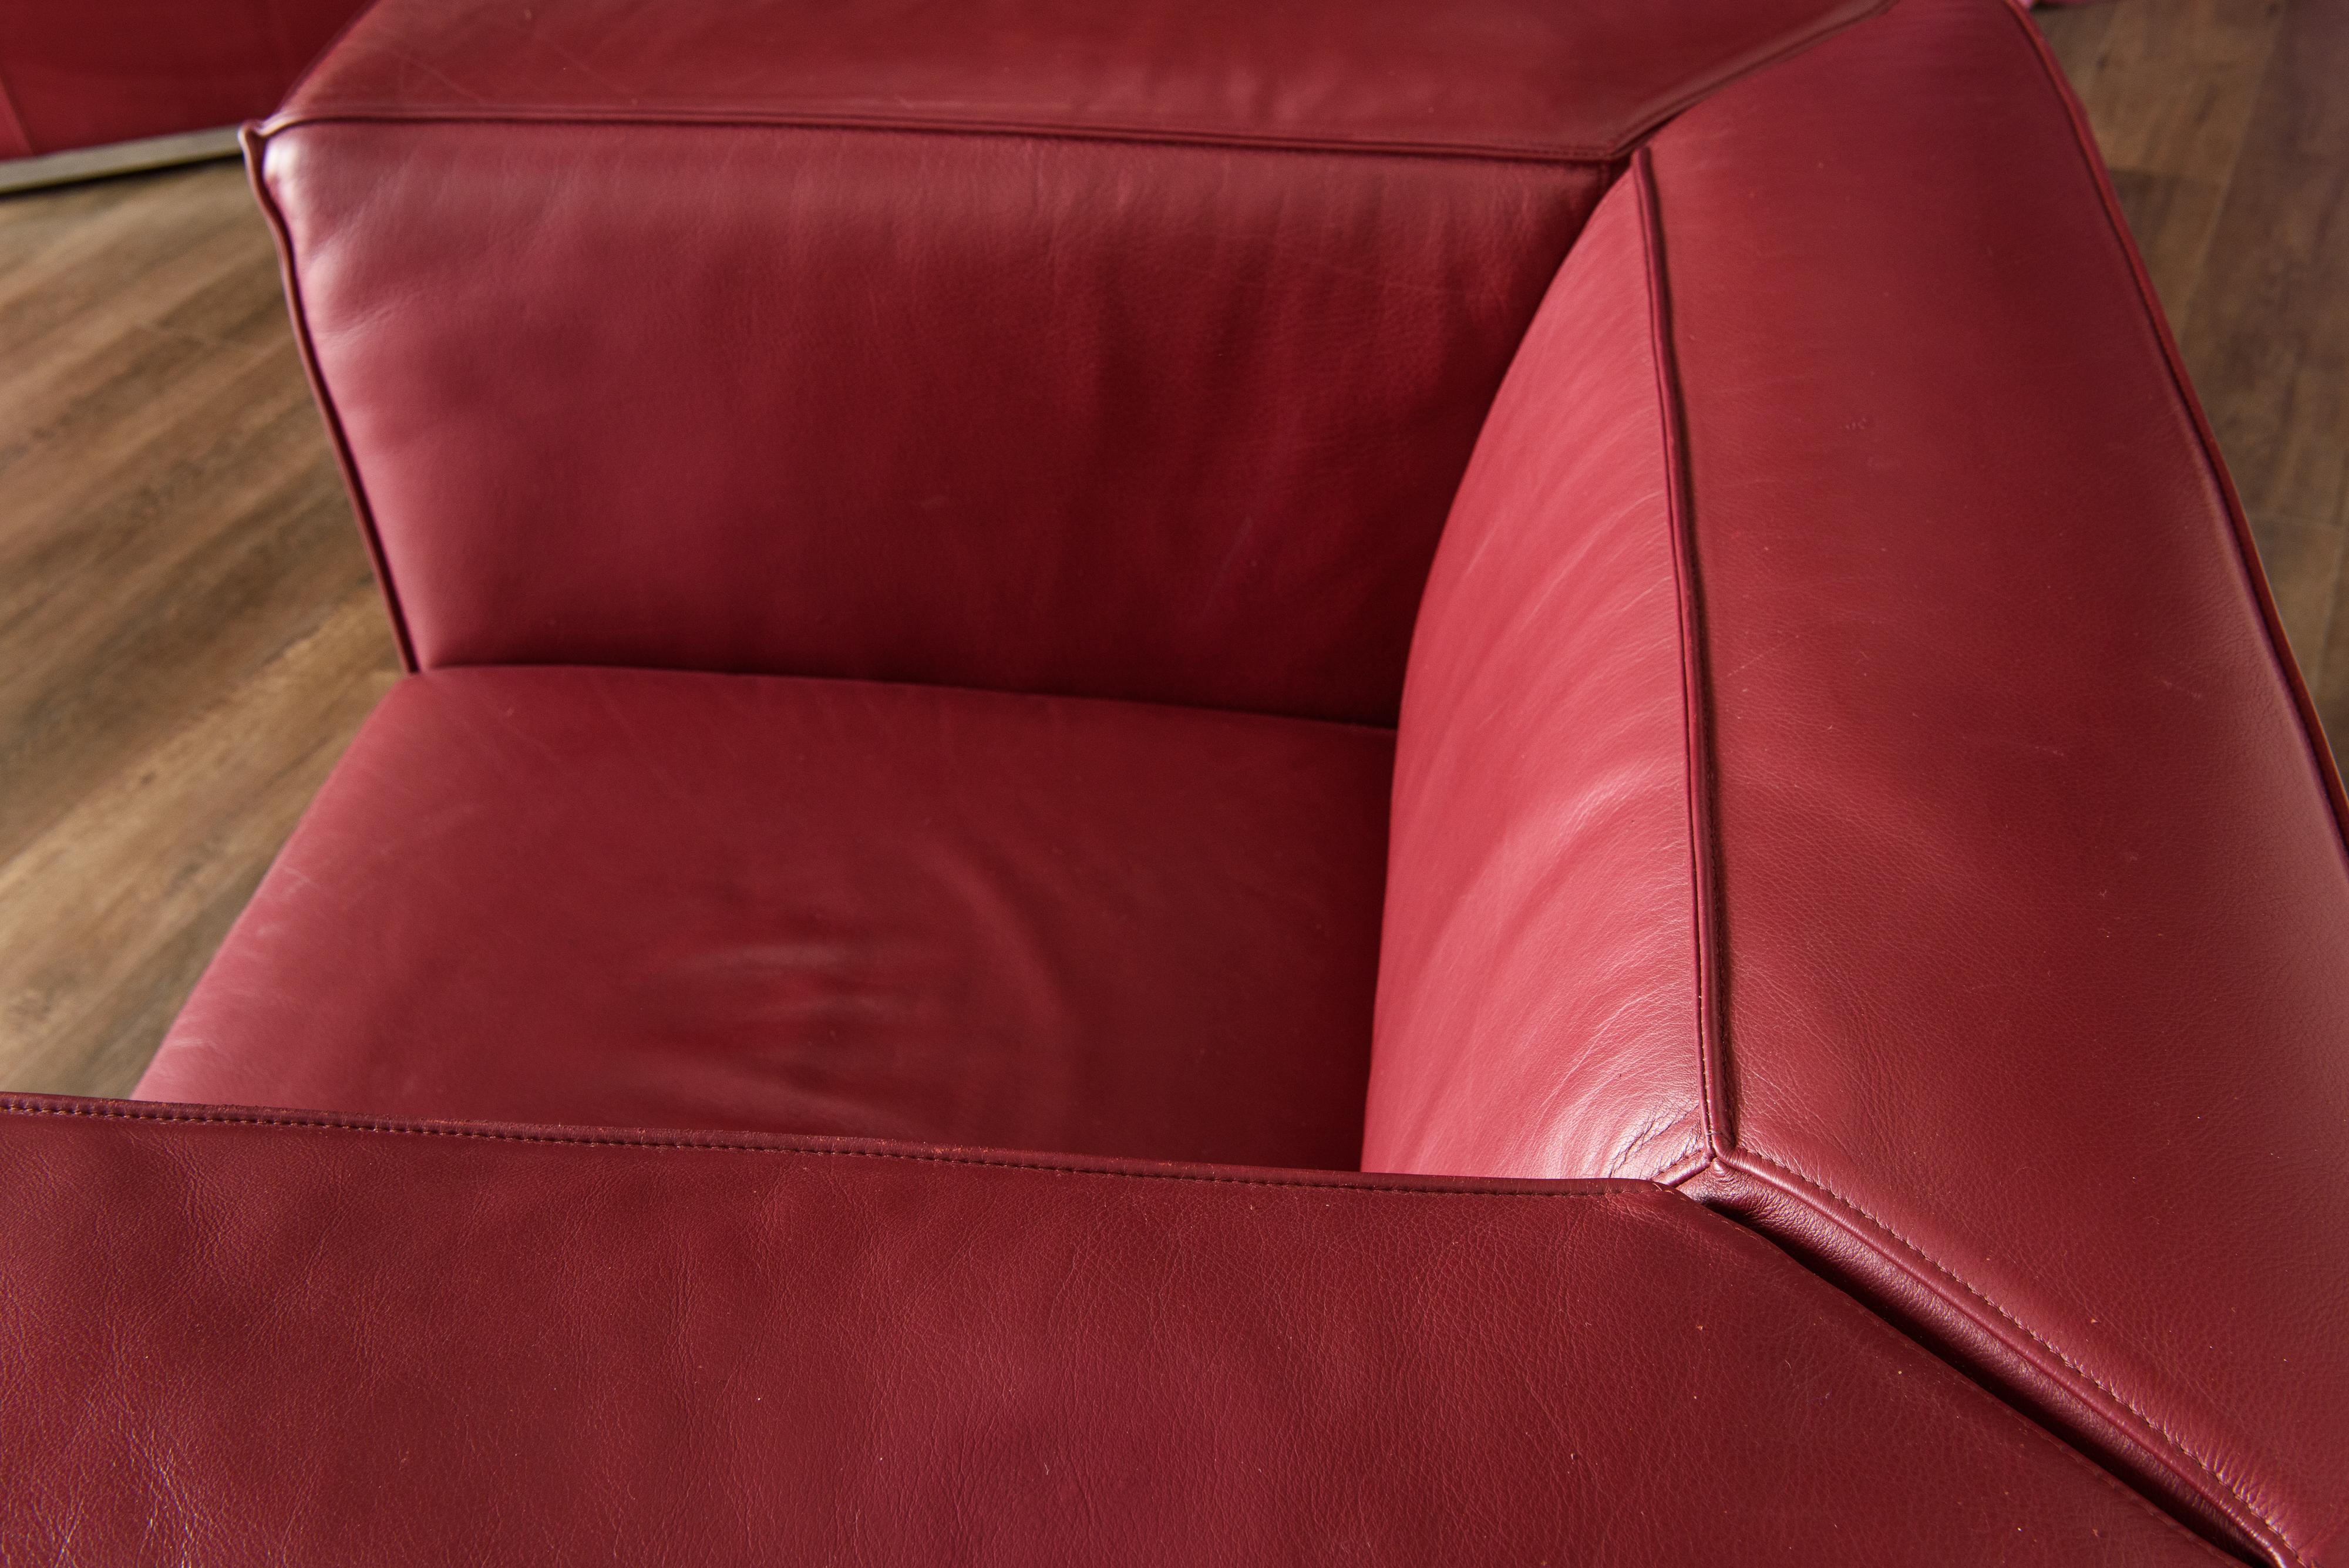 Burgundy Leather 'Blox' Club Chairs by Jehs + Laub for Cassina, 2002, Signed 9